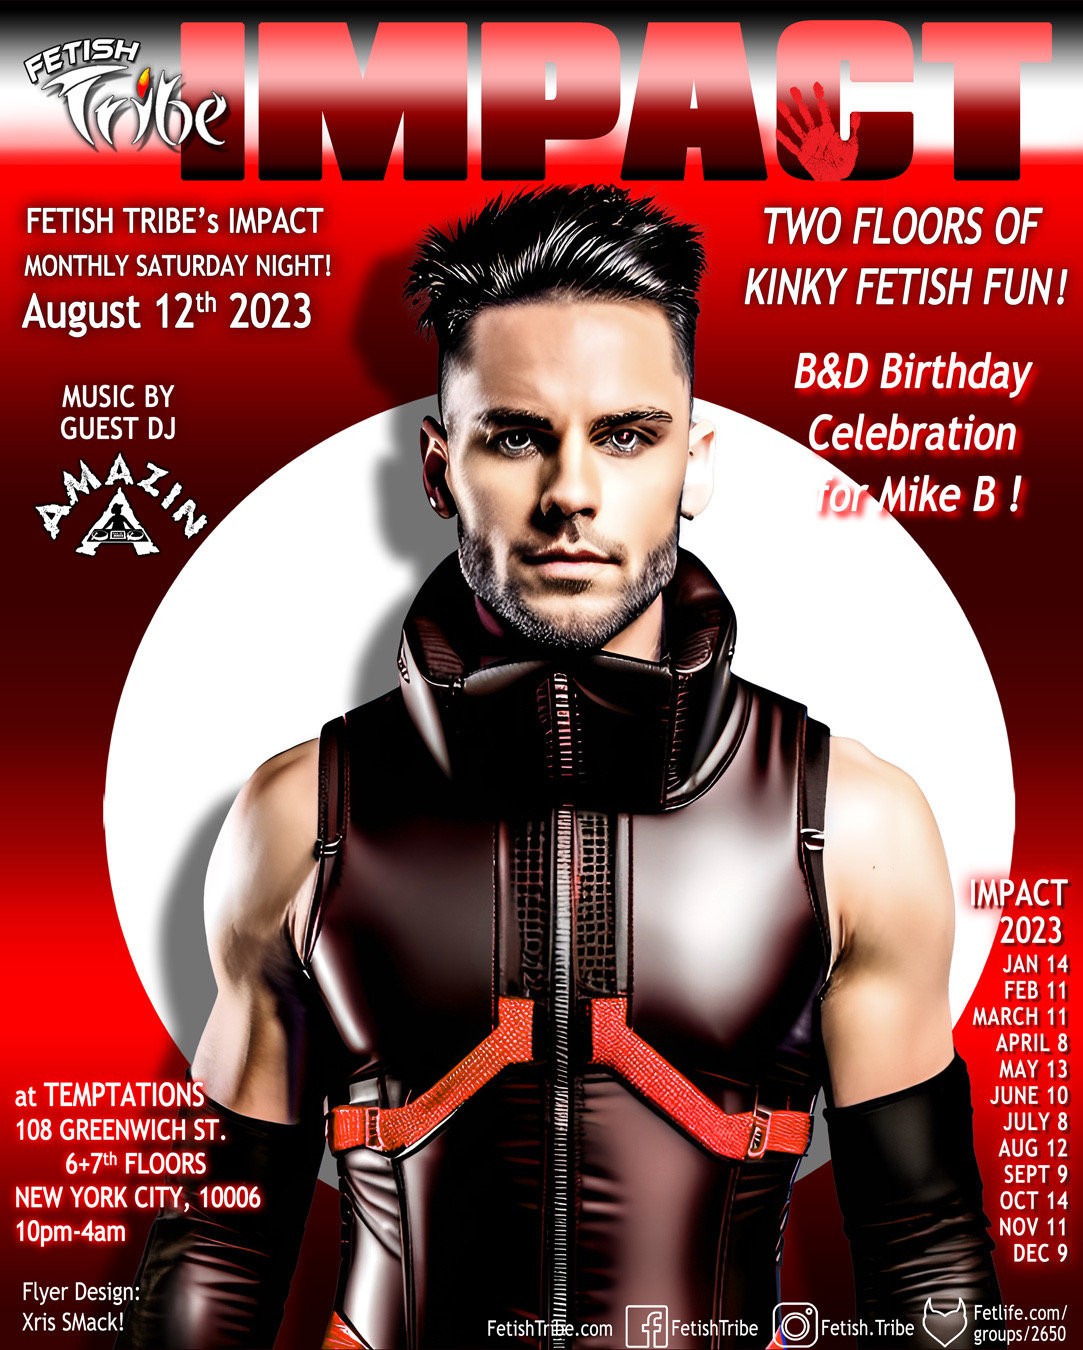 IMPACT! returns Saturday August 12th for Mike B’s B&D Birthday bash!